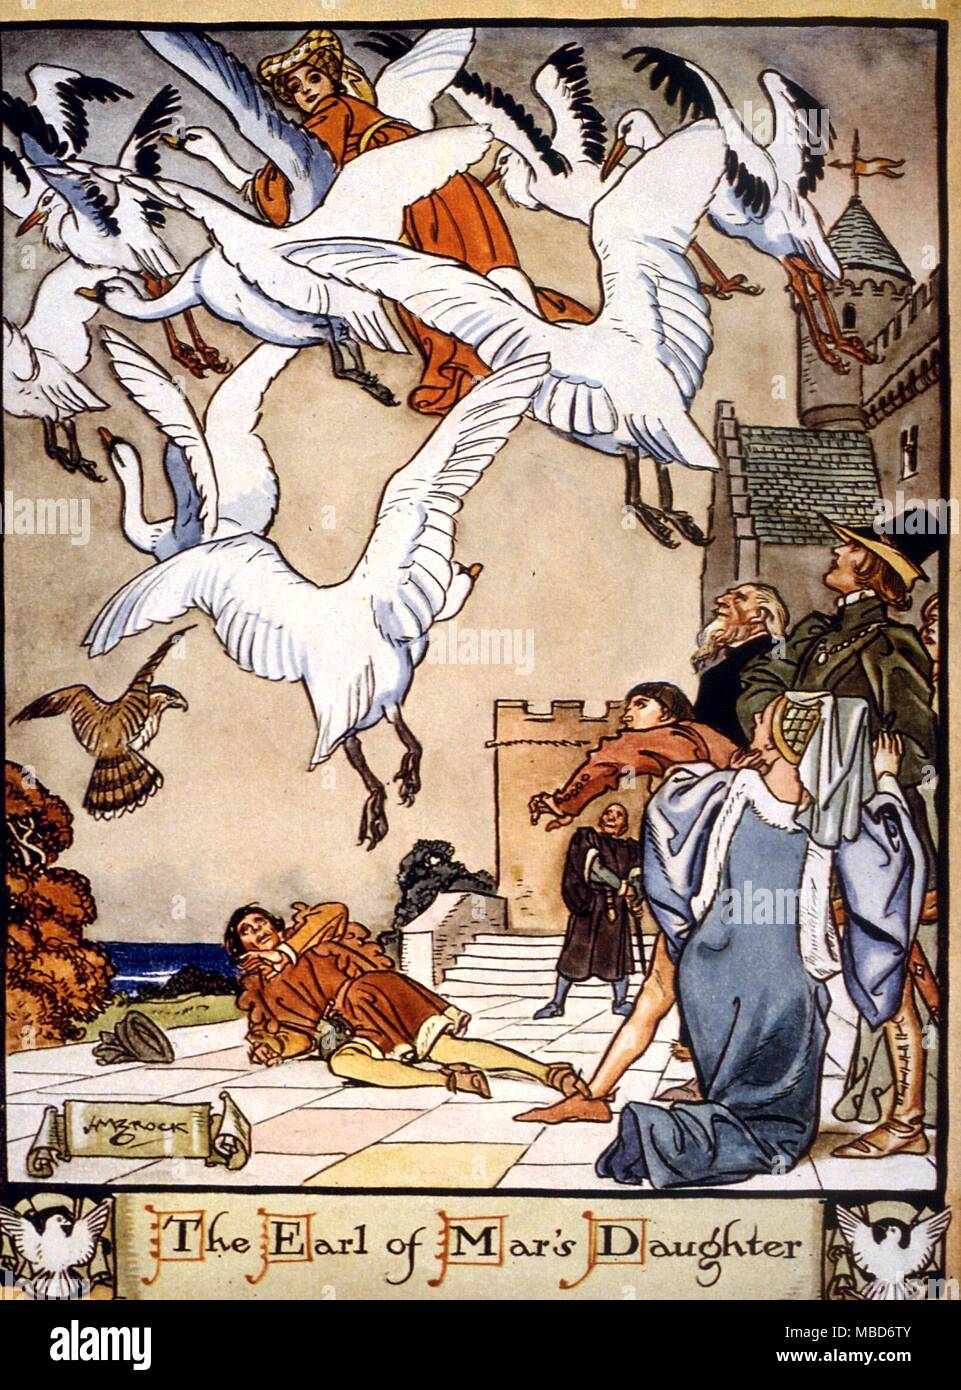 British mythology - The Earl of Mar's Daughter flies away on the back of the dove which is a dove 'the live-lang day... A sprightly youth at night'. From H. M. Brock's illustrations to A Book of Old Ballads, 1934 Stock Photo